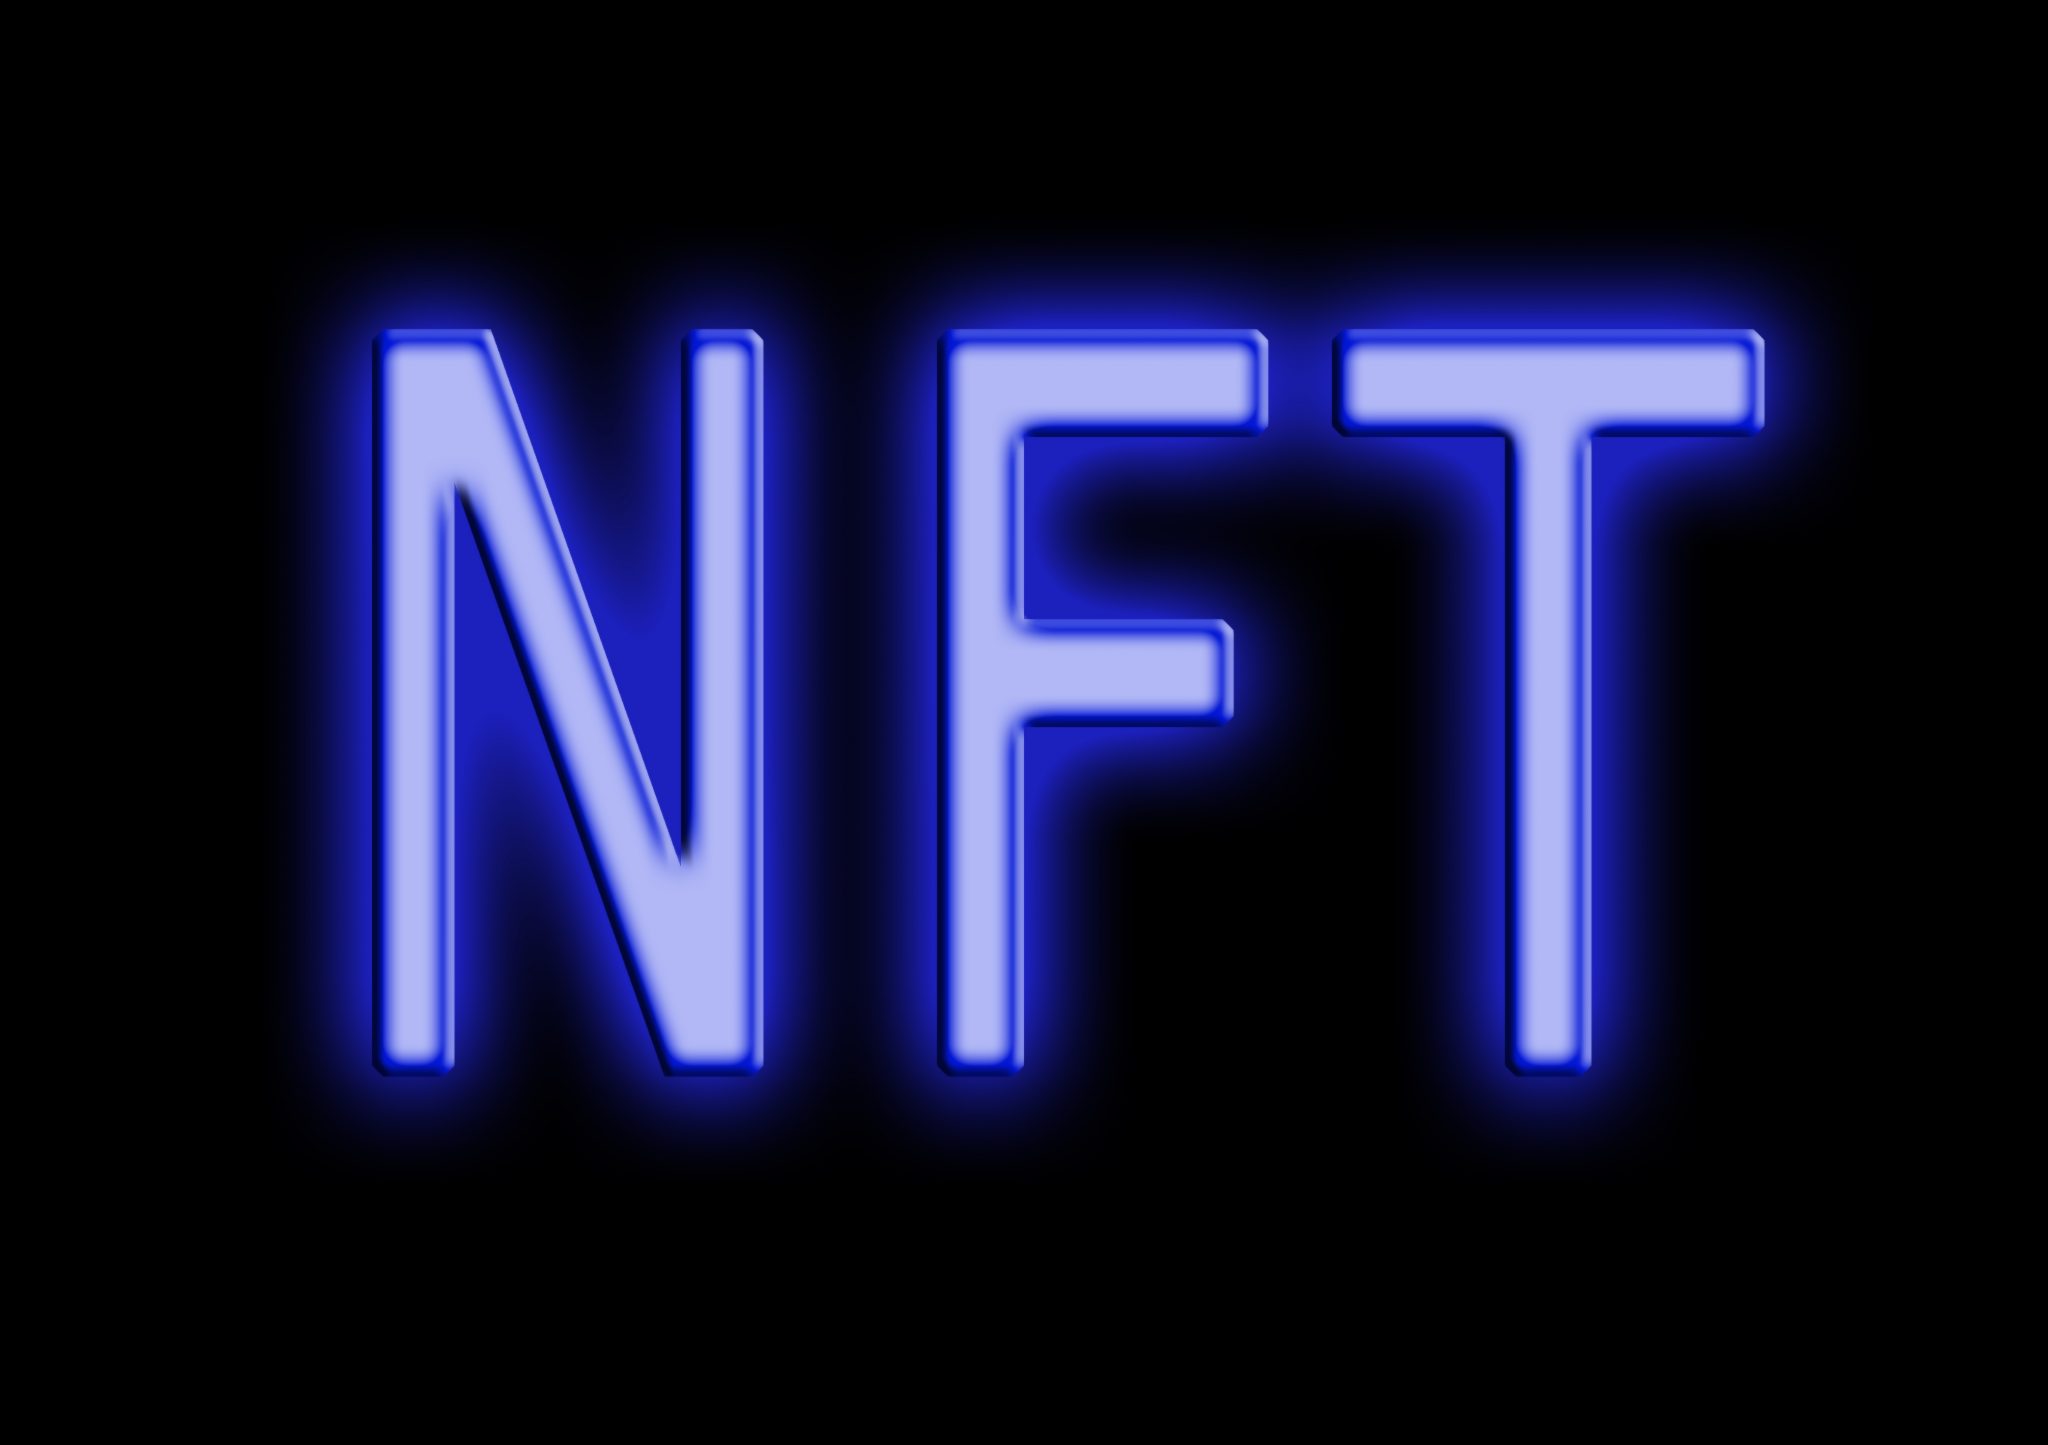 NFT ( Non-Fungible Token ) neon style text on black background